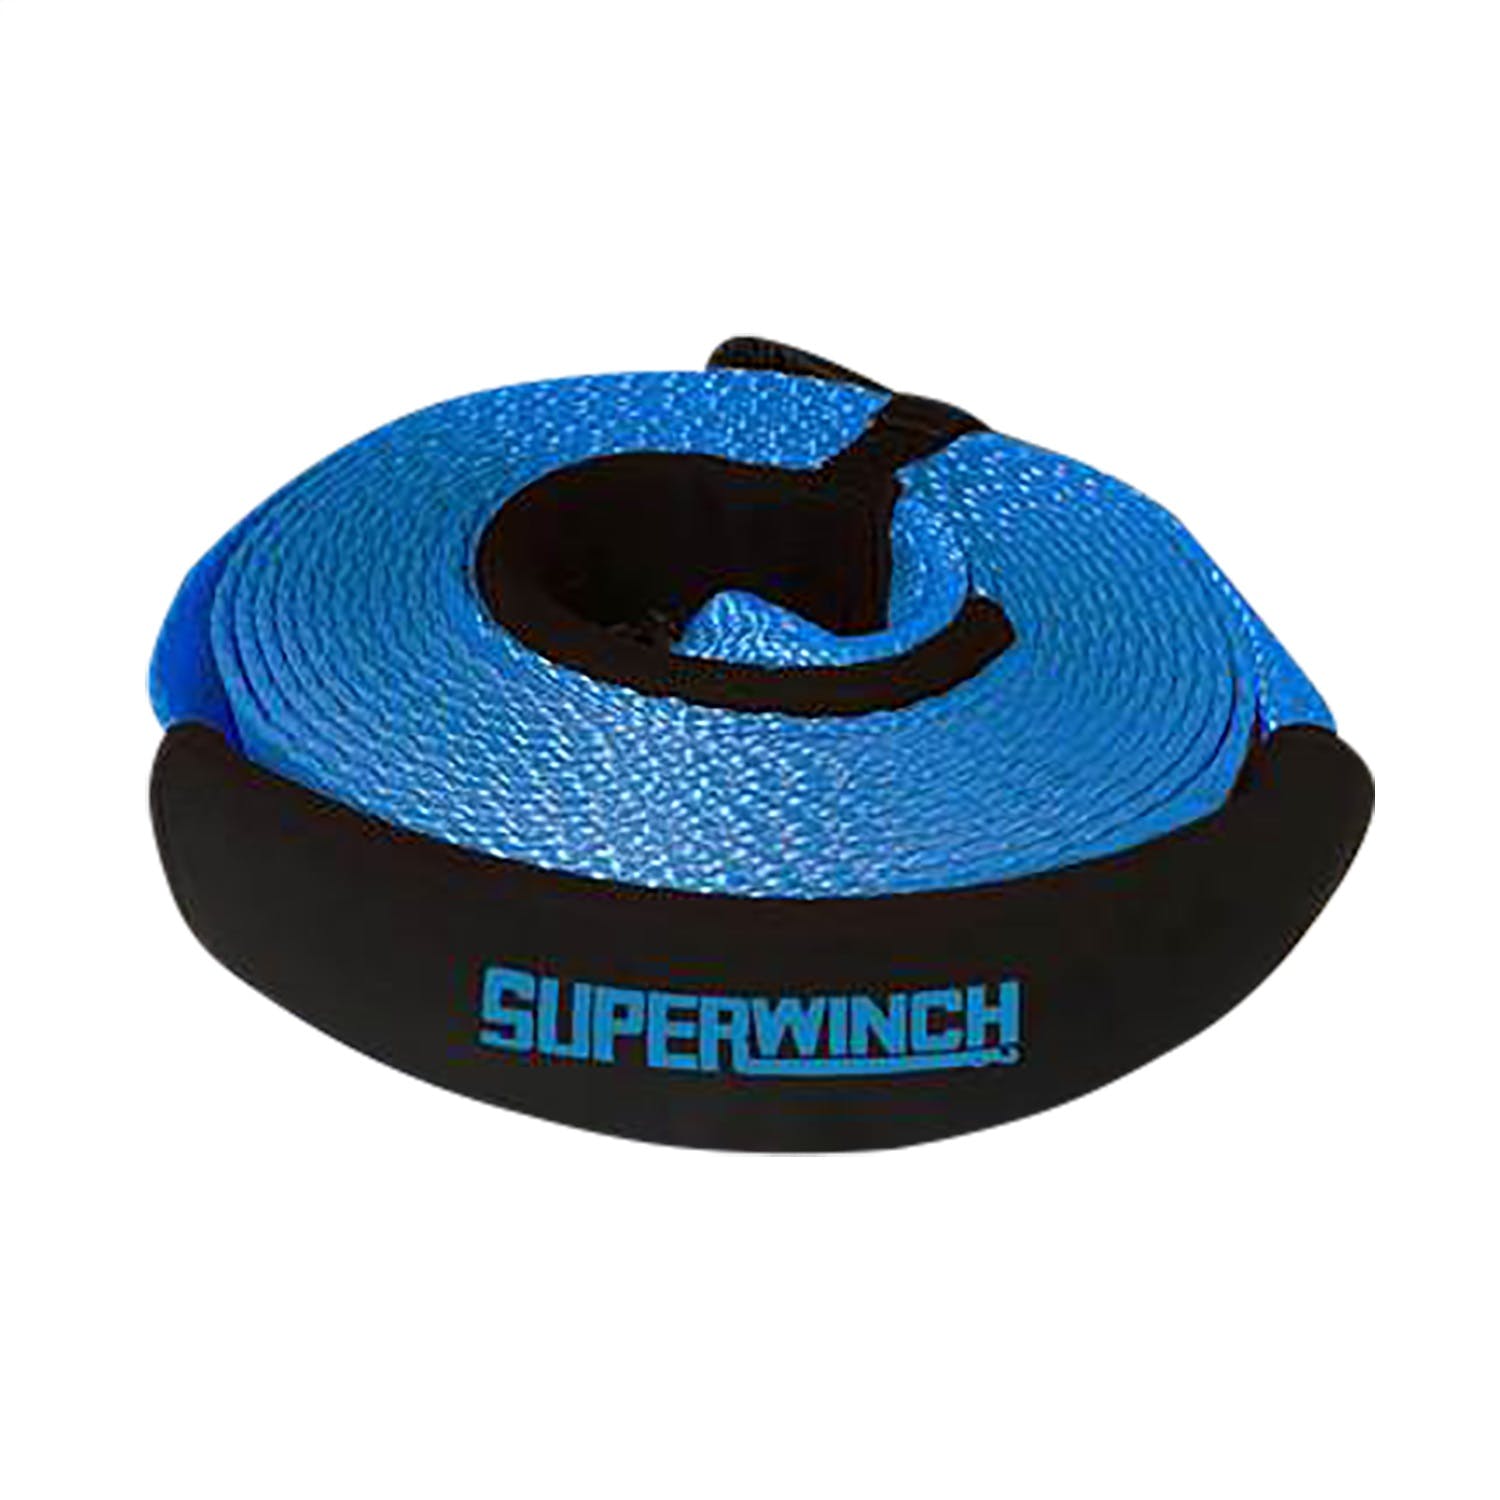 Superwinch 2588 Tree Trunk Protector